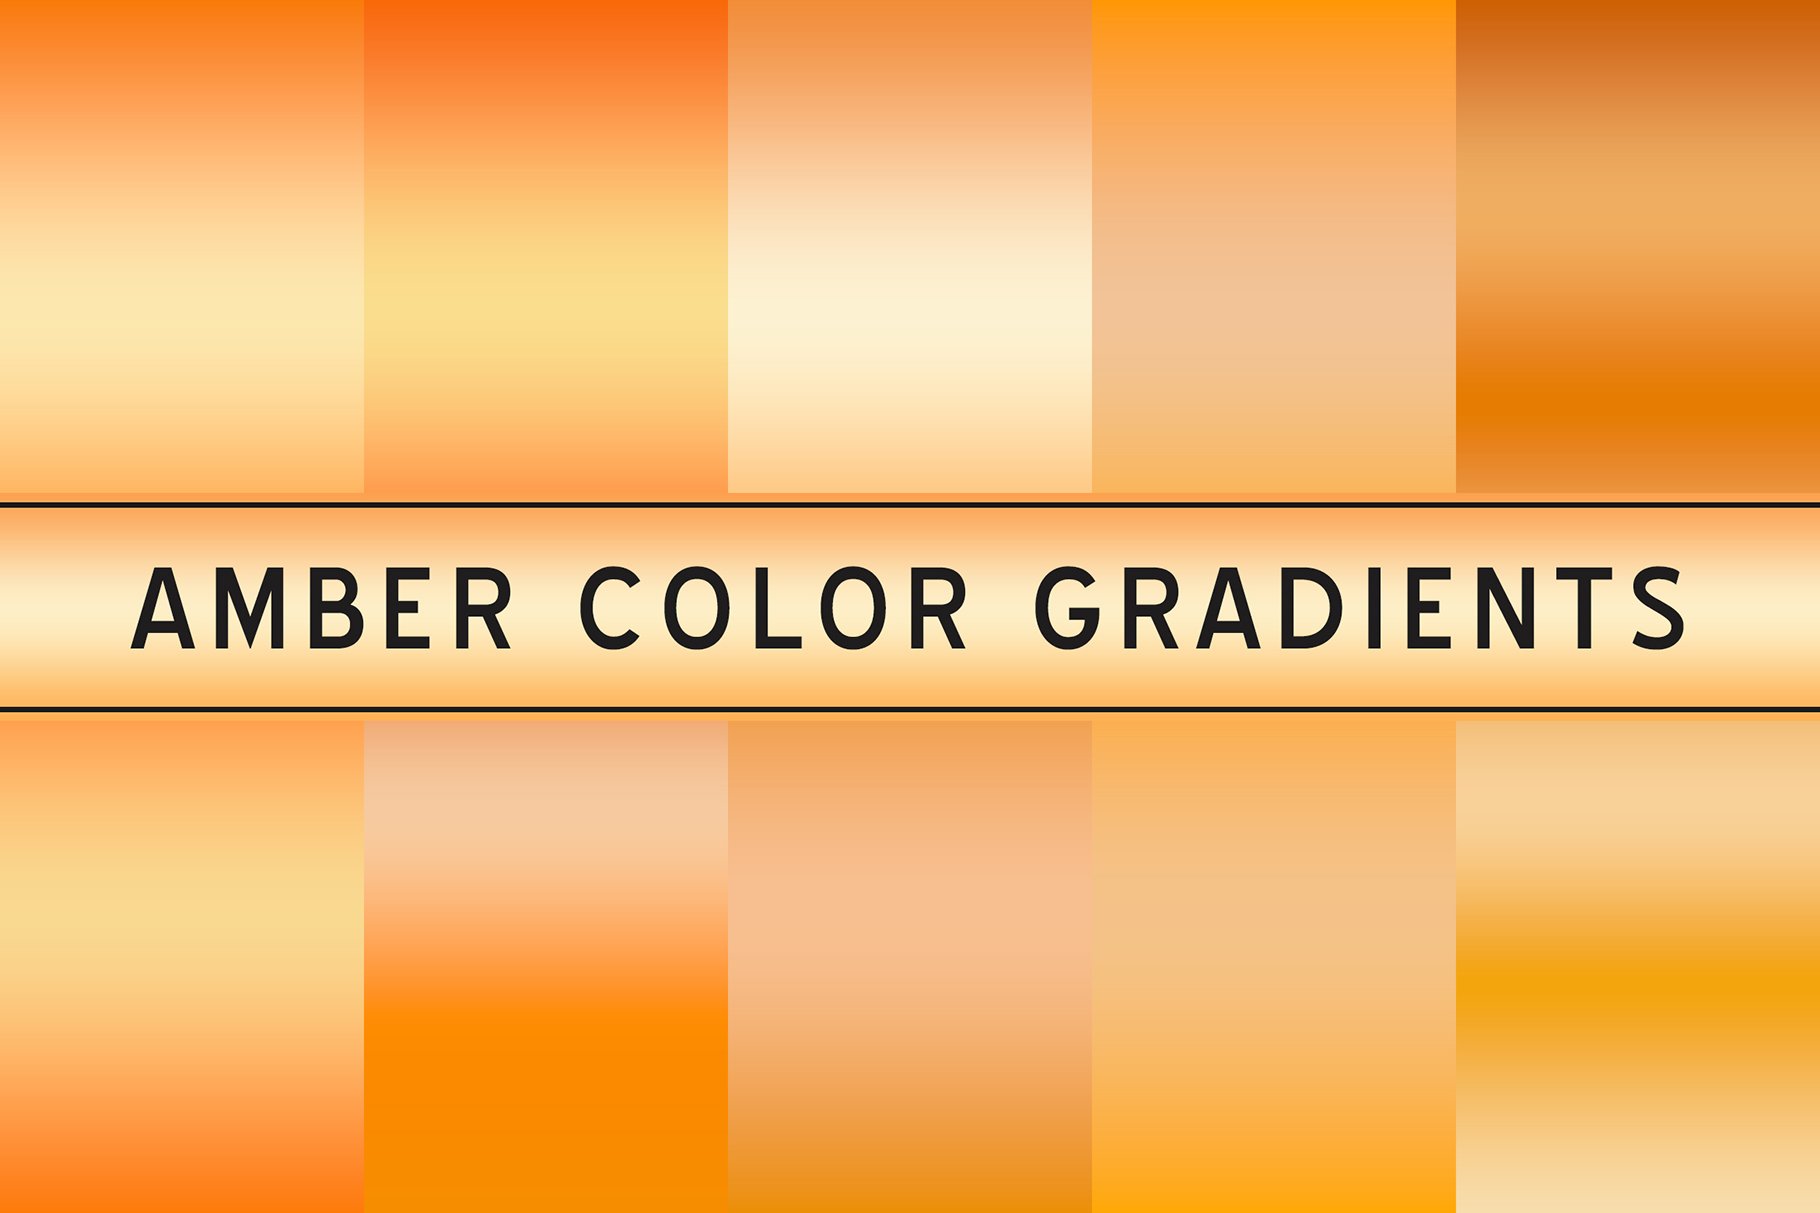 Amber Color Gradients cover image.